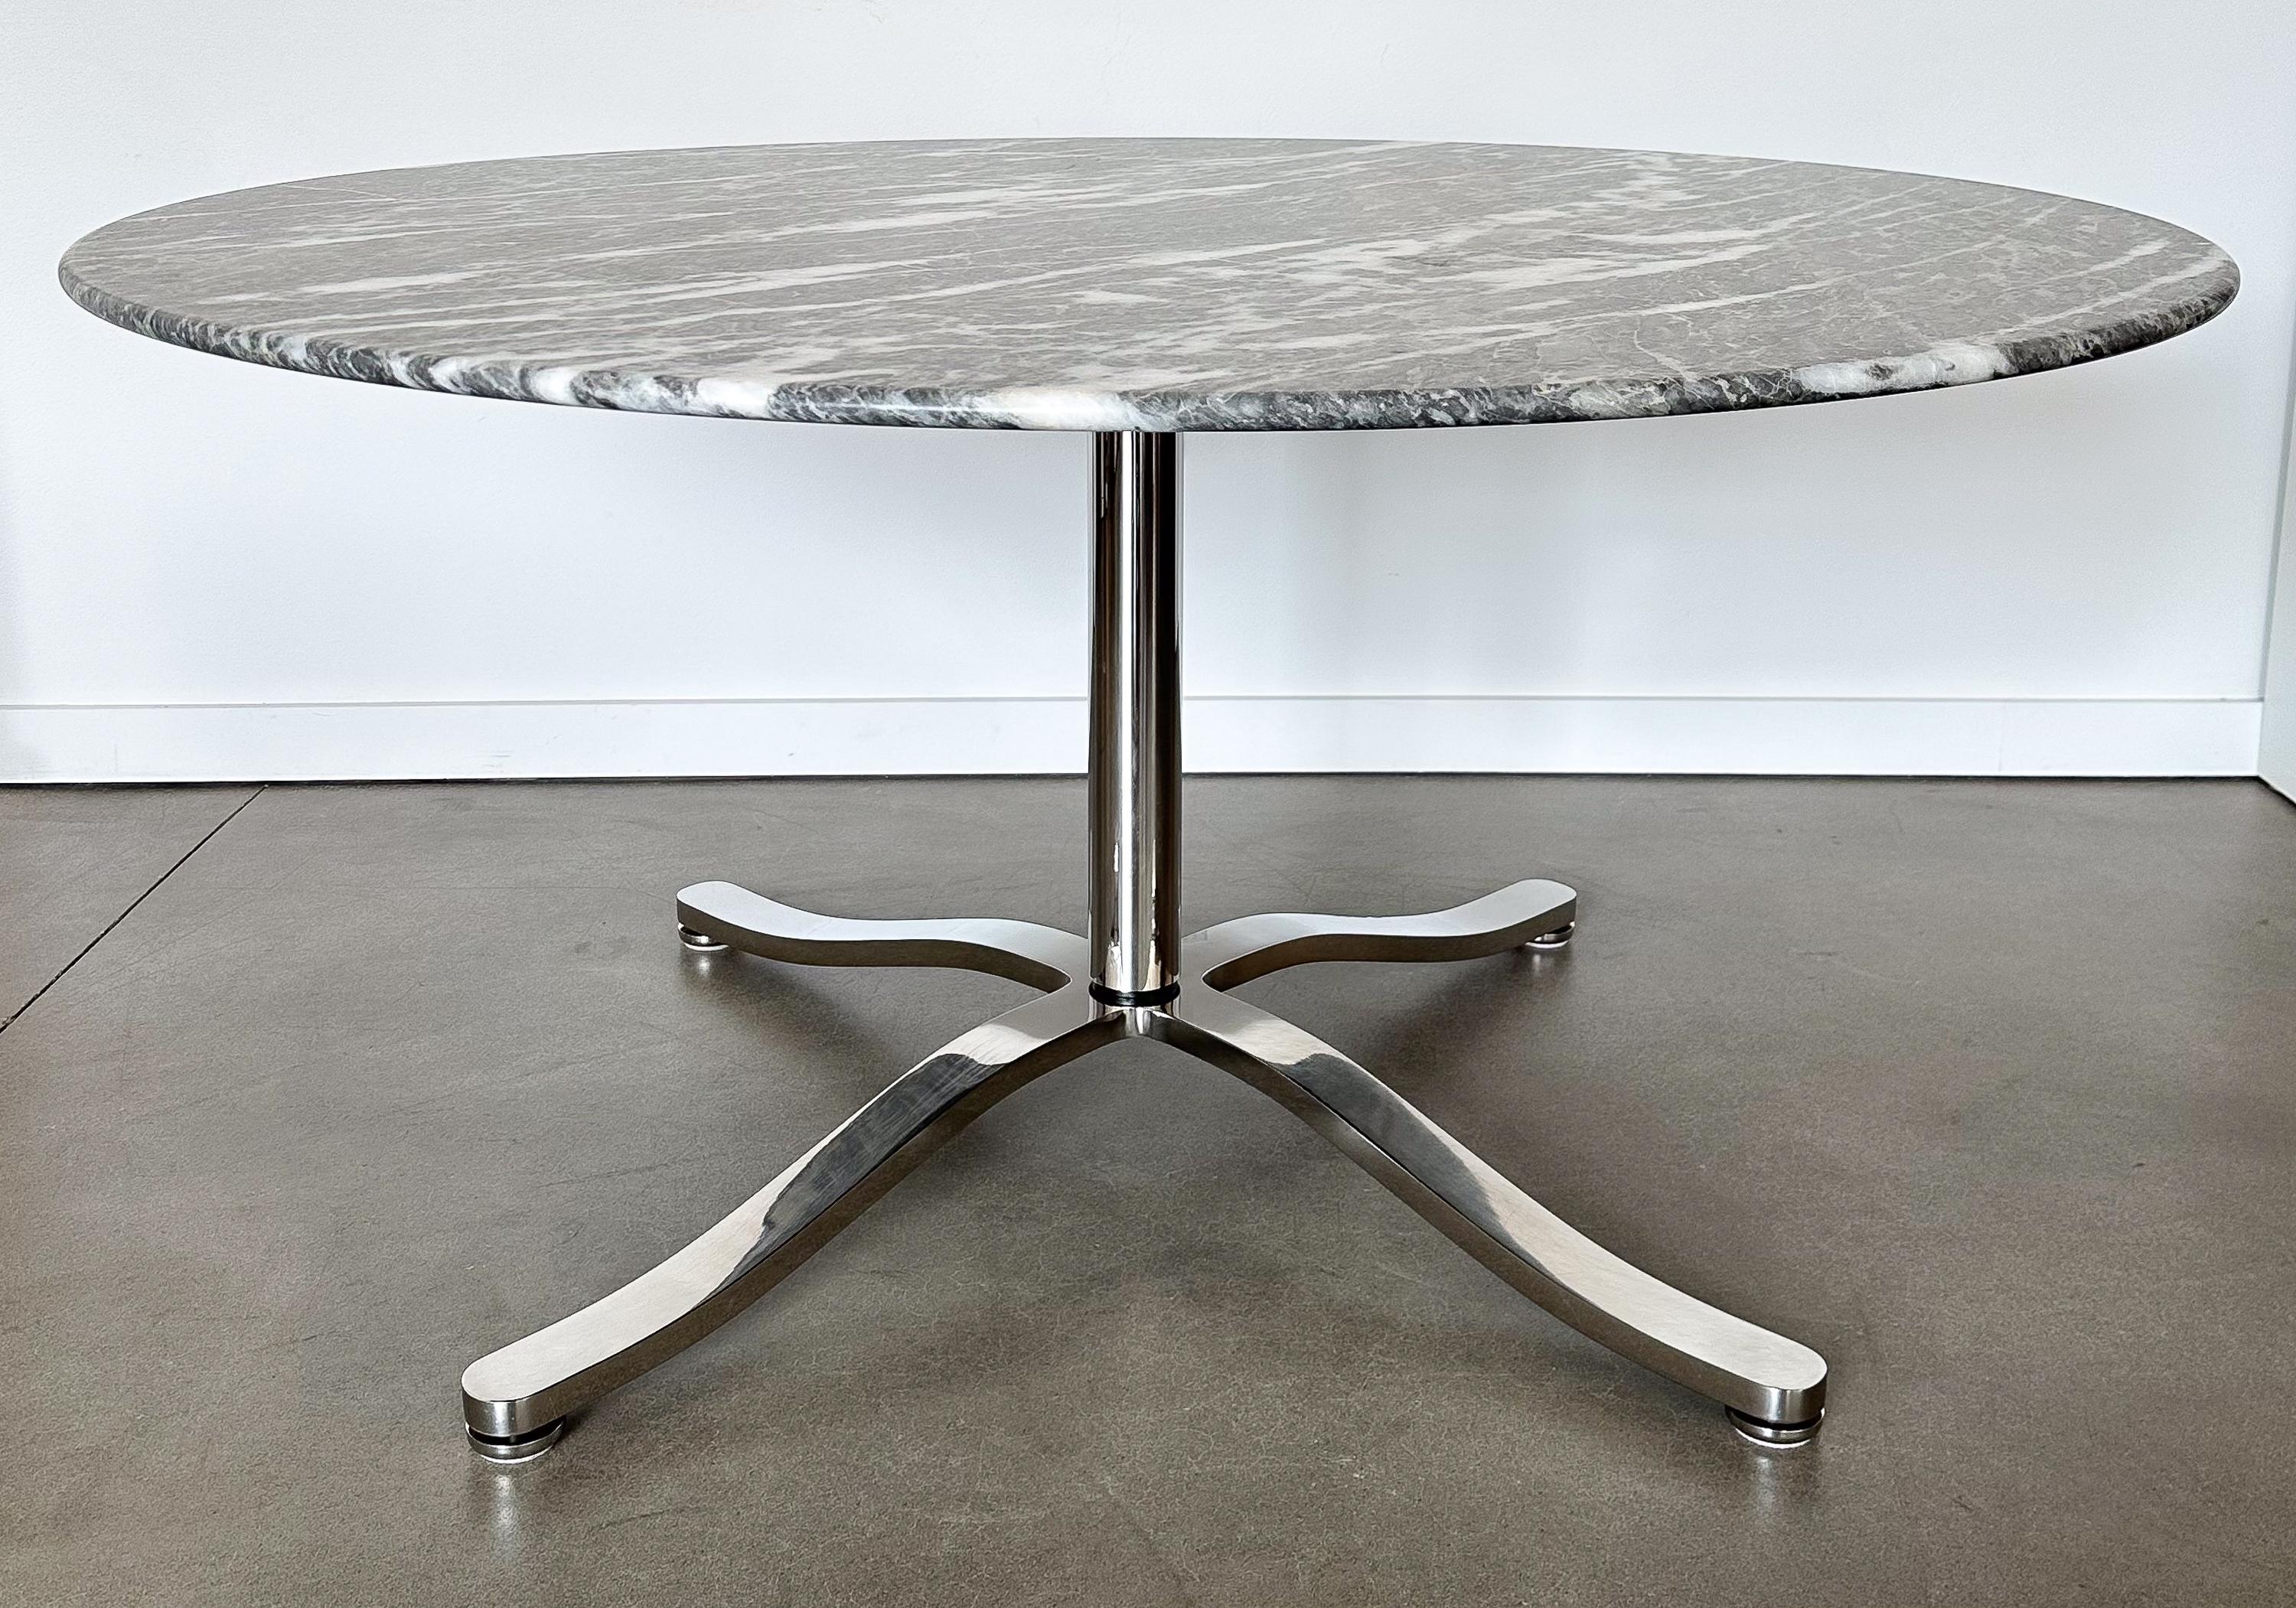 Elevate your dining experience with this exquisite marble dining table by the design maestro, Nicos Zographos. Crafted in the vibrant design era of the 1970s, this table is a stellar embodiment of elegance, precision, and functionality.

Spanning a